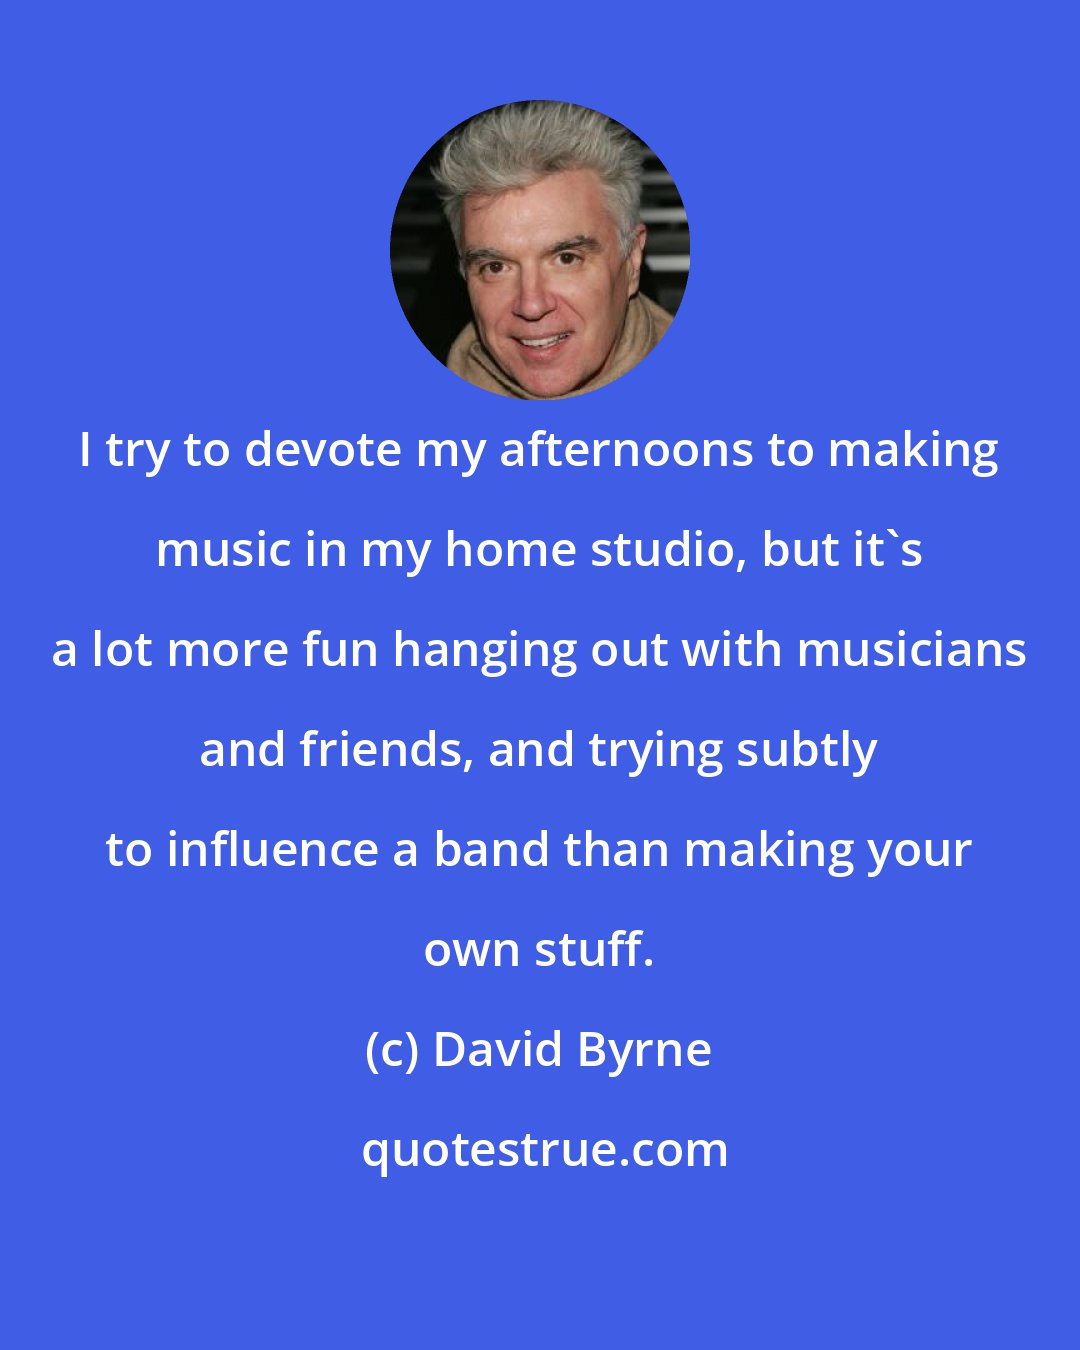 David Byrne: I try to devote my afternoons to making music in my home studio, but it's a lot more fun hanging out with musicians and friends, and trying subtly to influence a band than making your own stuff.